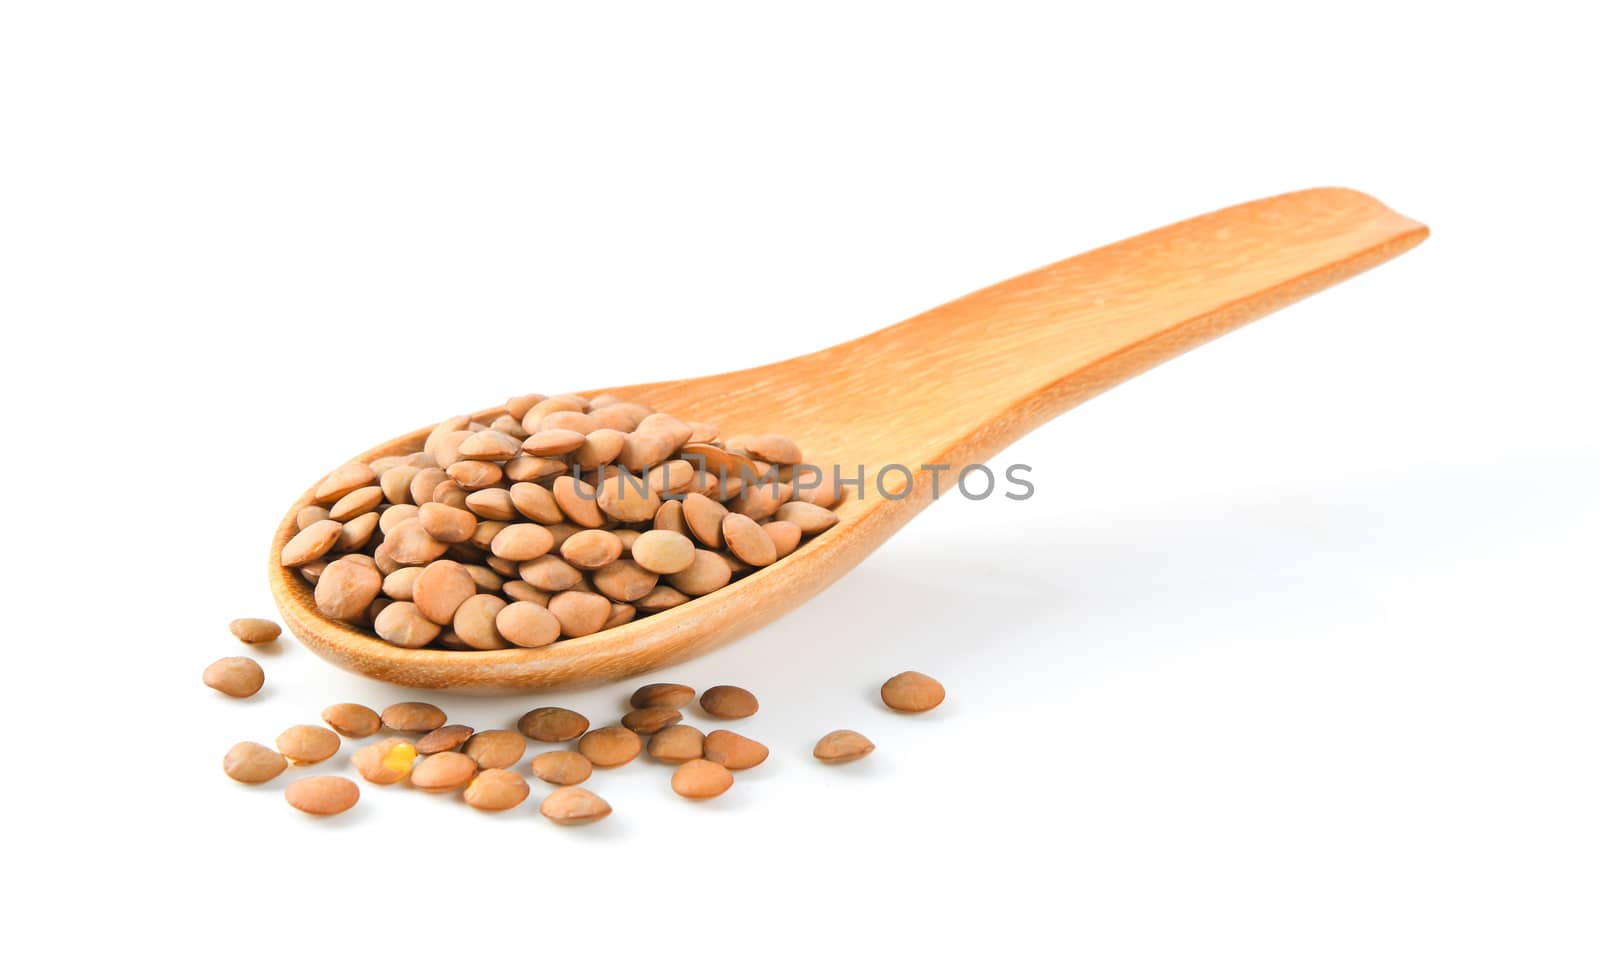 Brown Lentils in wooden spoon on white background